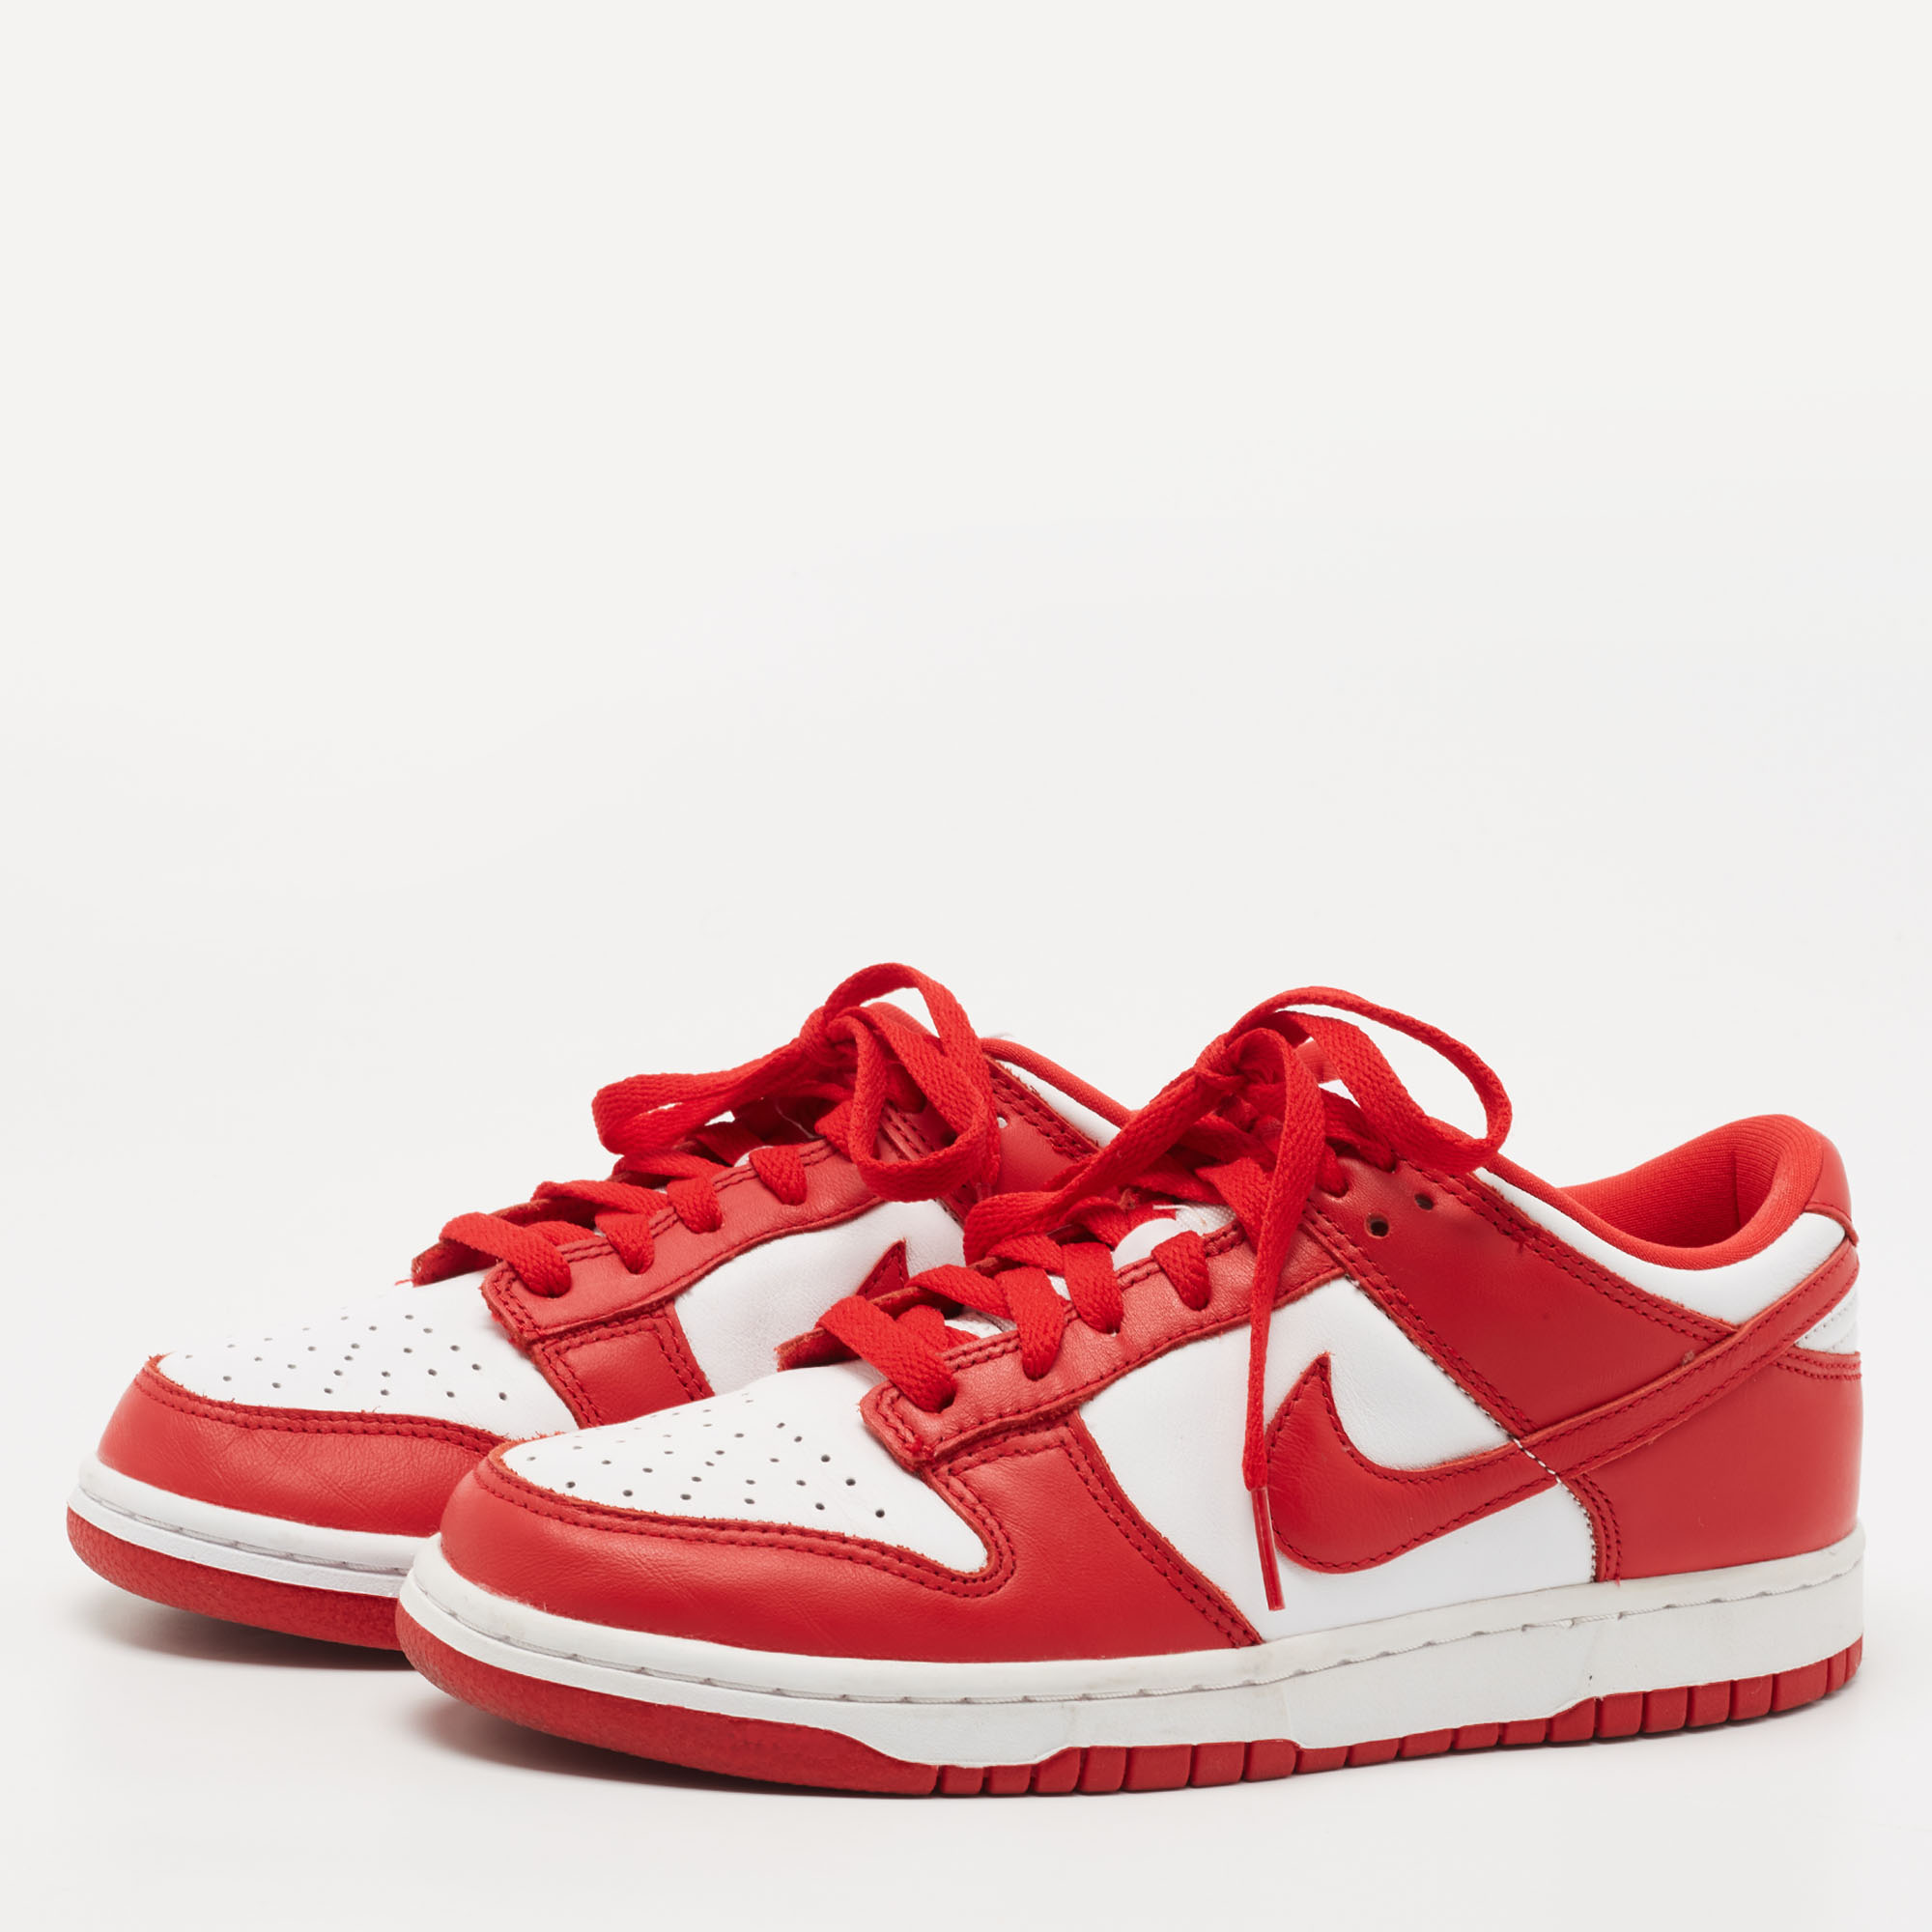 

Nike Dunk Red/White Leather Low University Sneakers Size